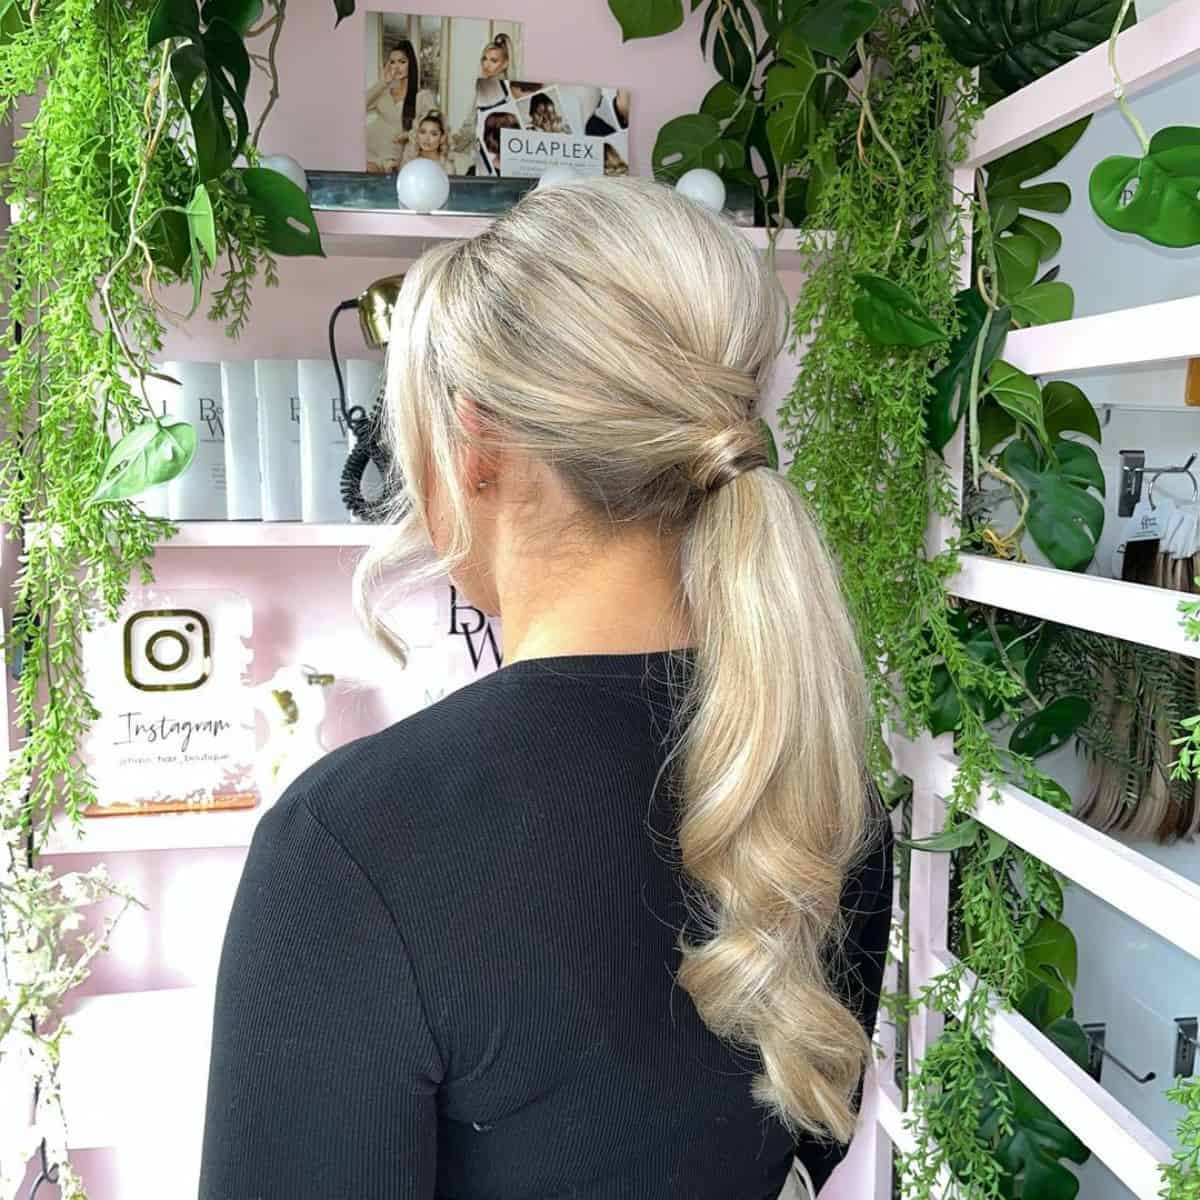 Low Ponytail woman's hairstyle.